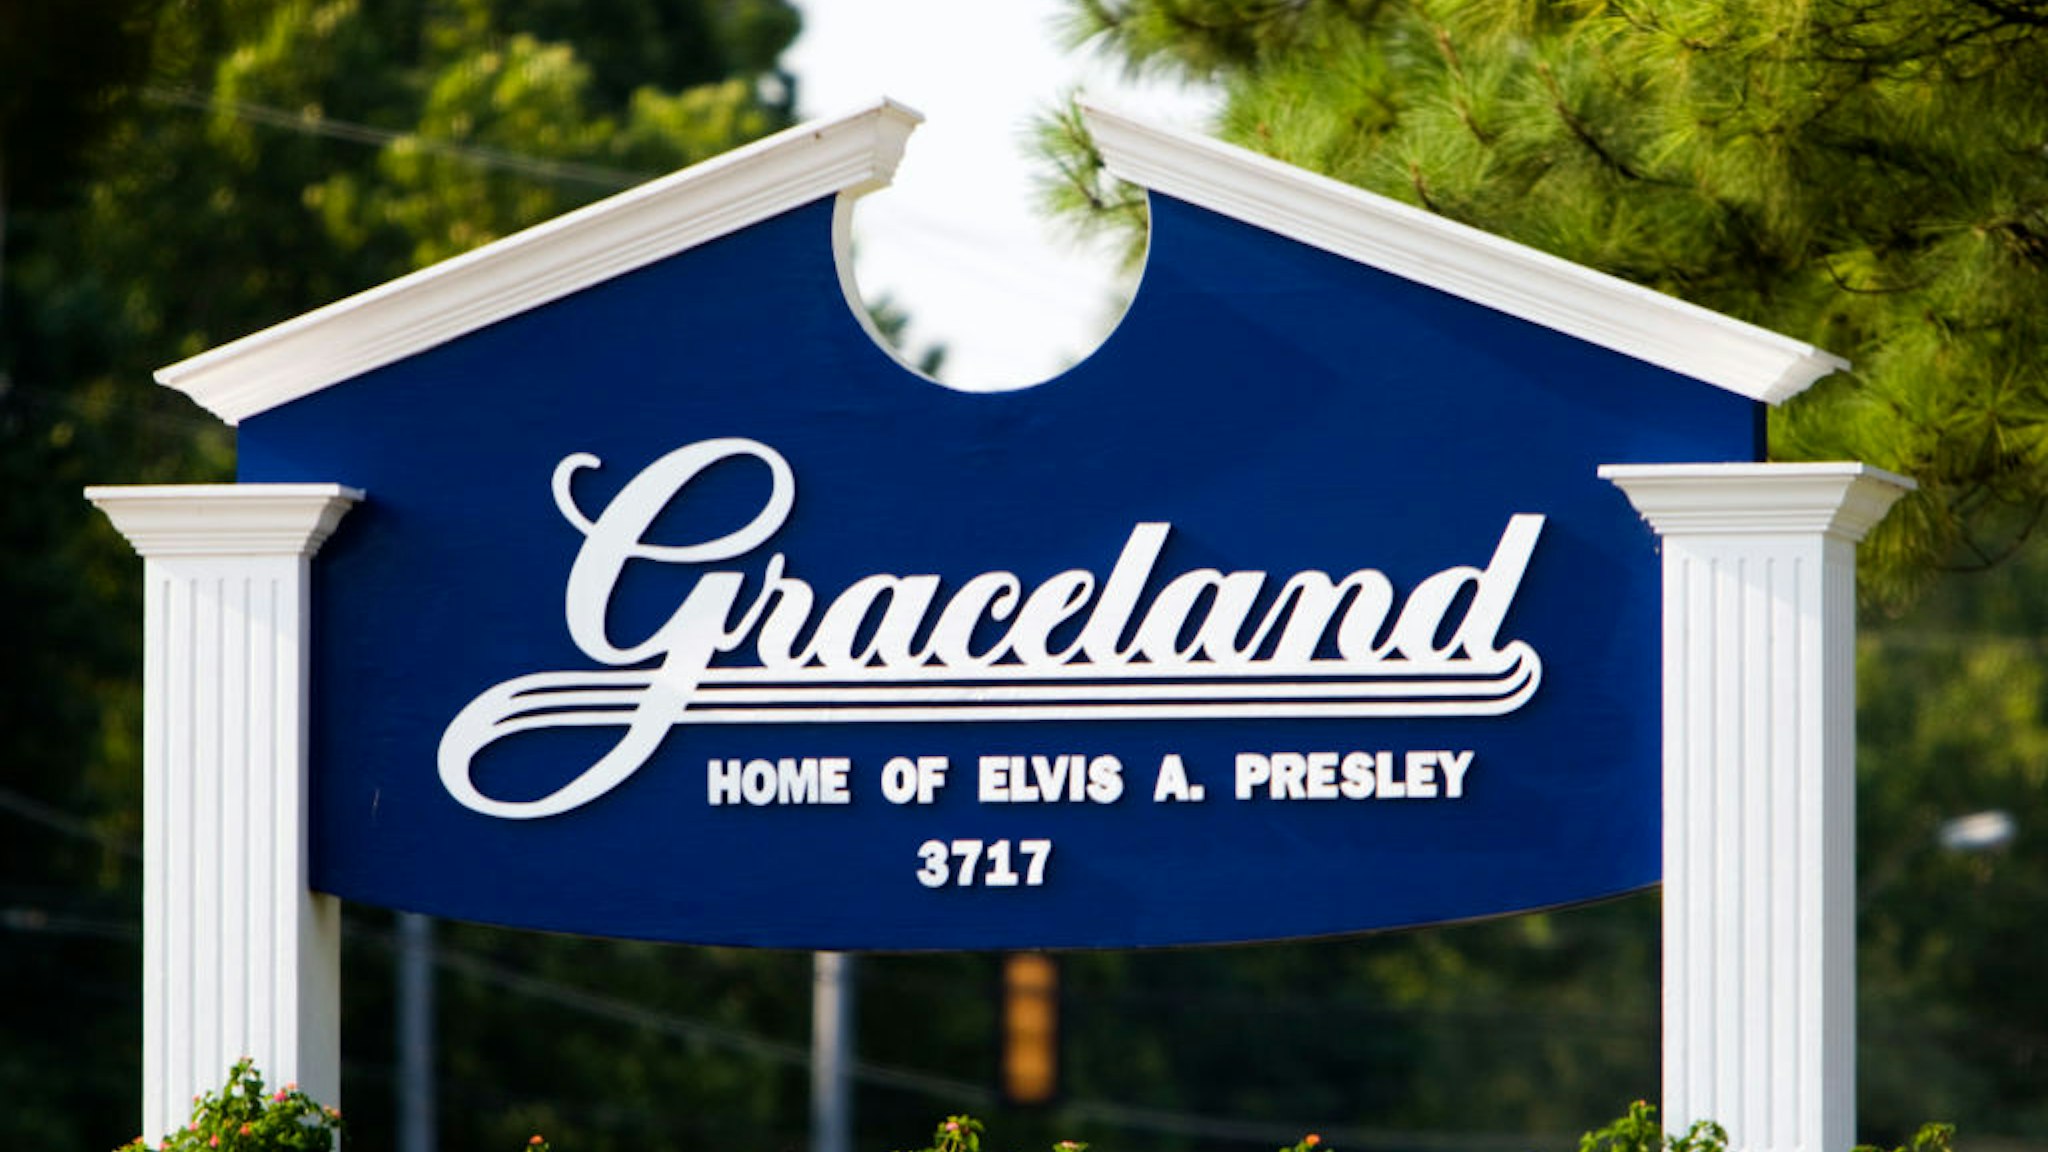 Graceland Elvis Presley mansion sign Memphis USA. (Photo by: Andrew Woodley/Universal Images Group via Getty Images)